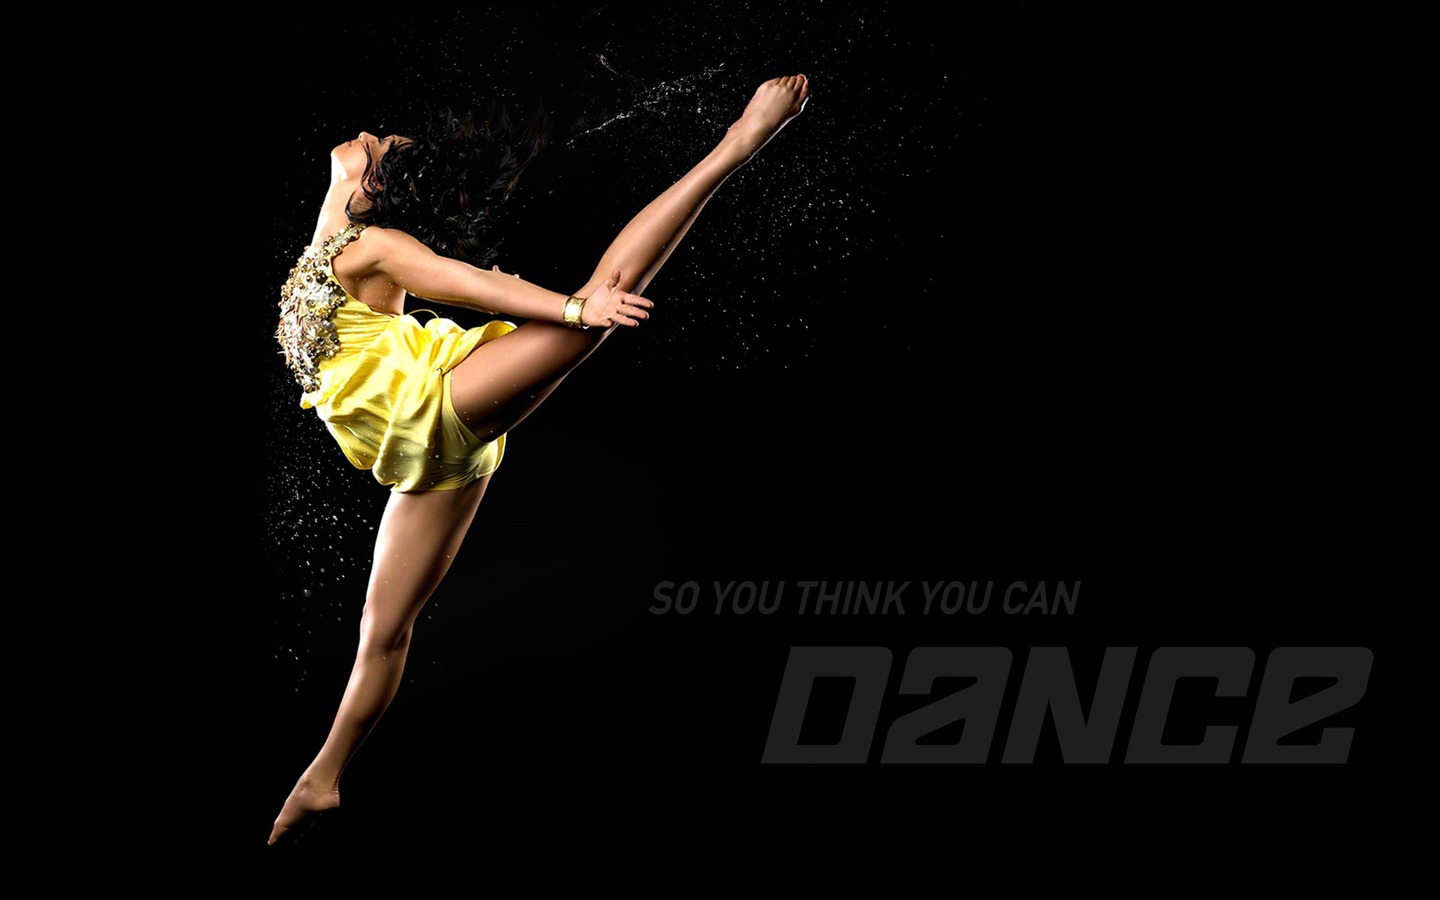 So You Think You Can Dance 舞林爭霸壁紙(一) #19 - 1440x900